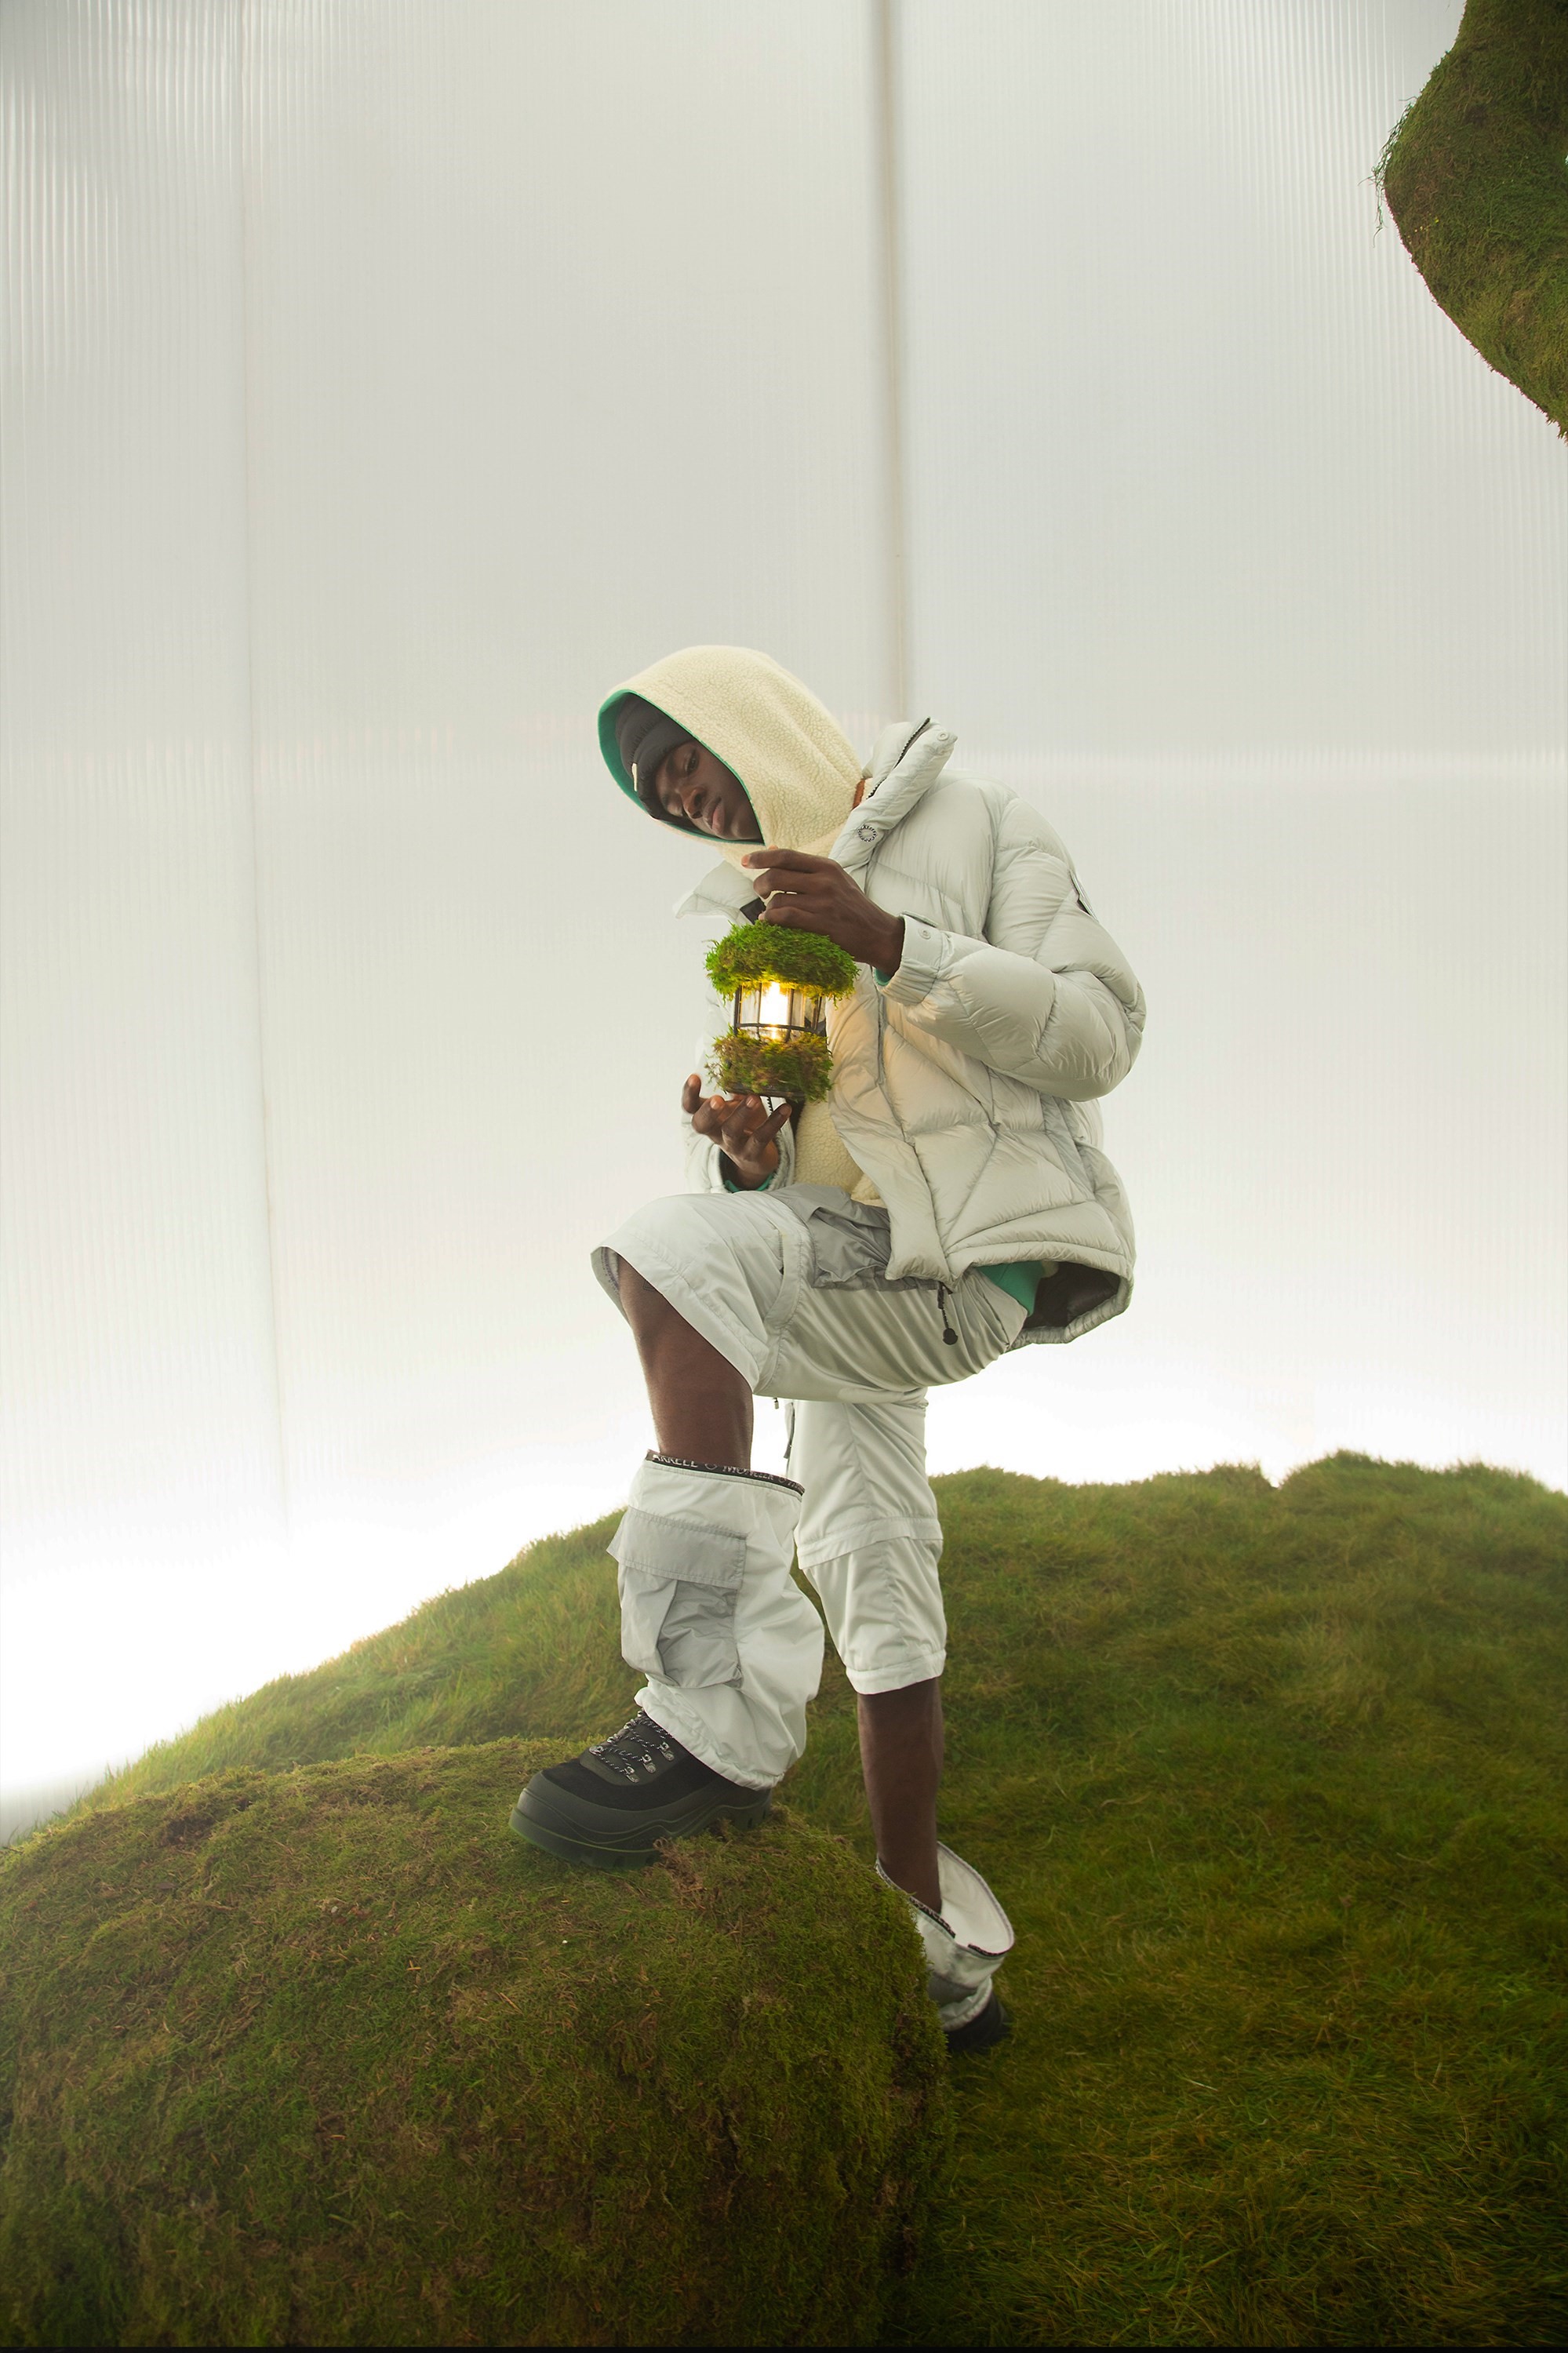 Moncler x Pharrell Williams Collection  The Party, The Performance, And  The Puffer